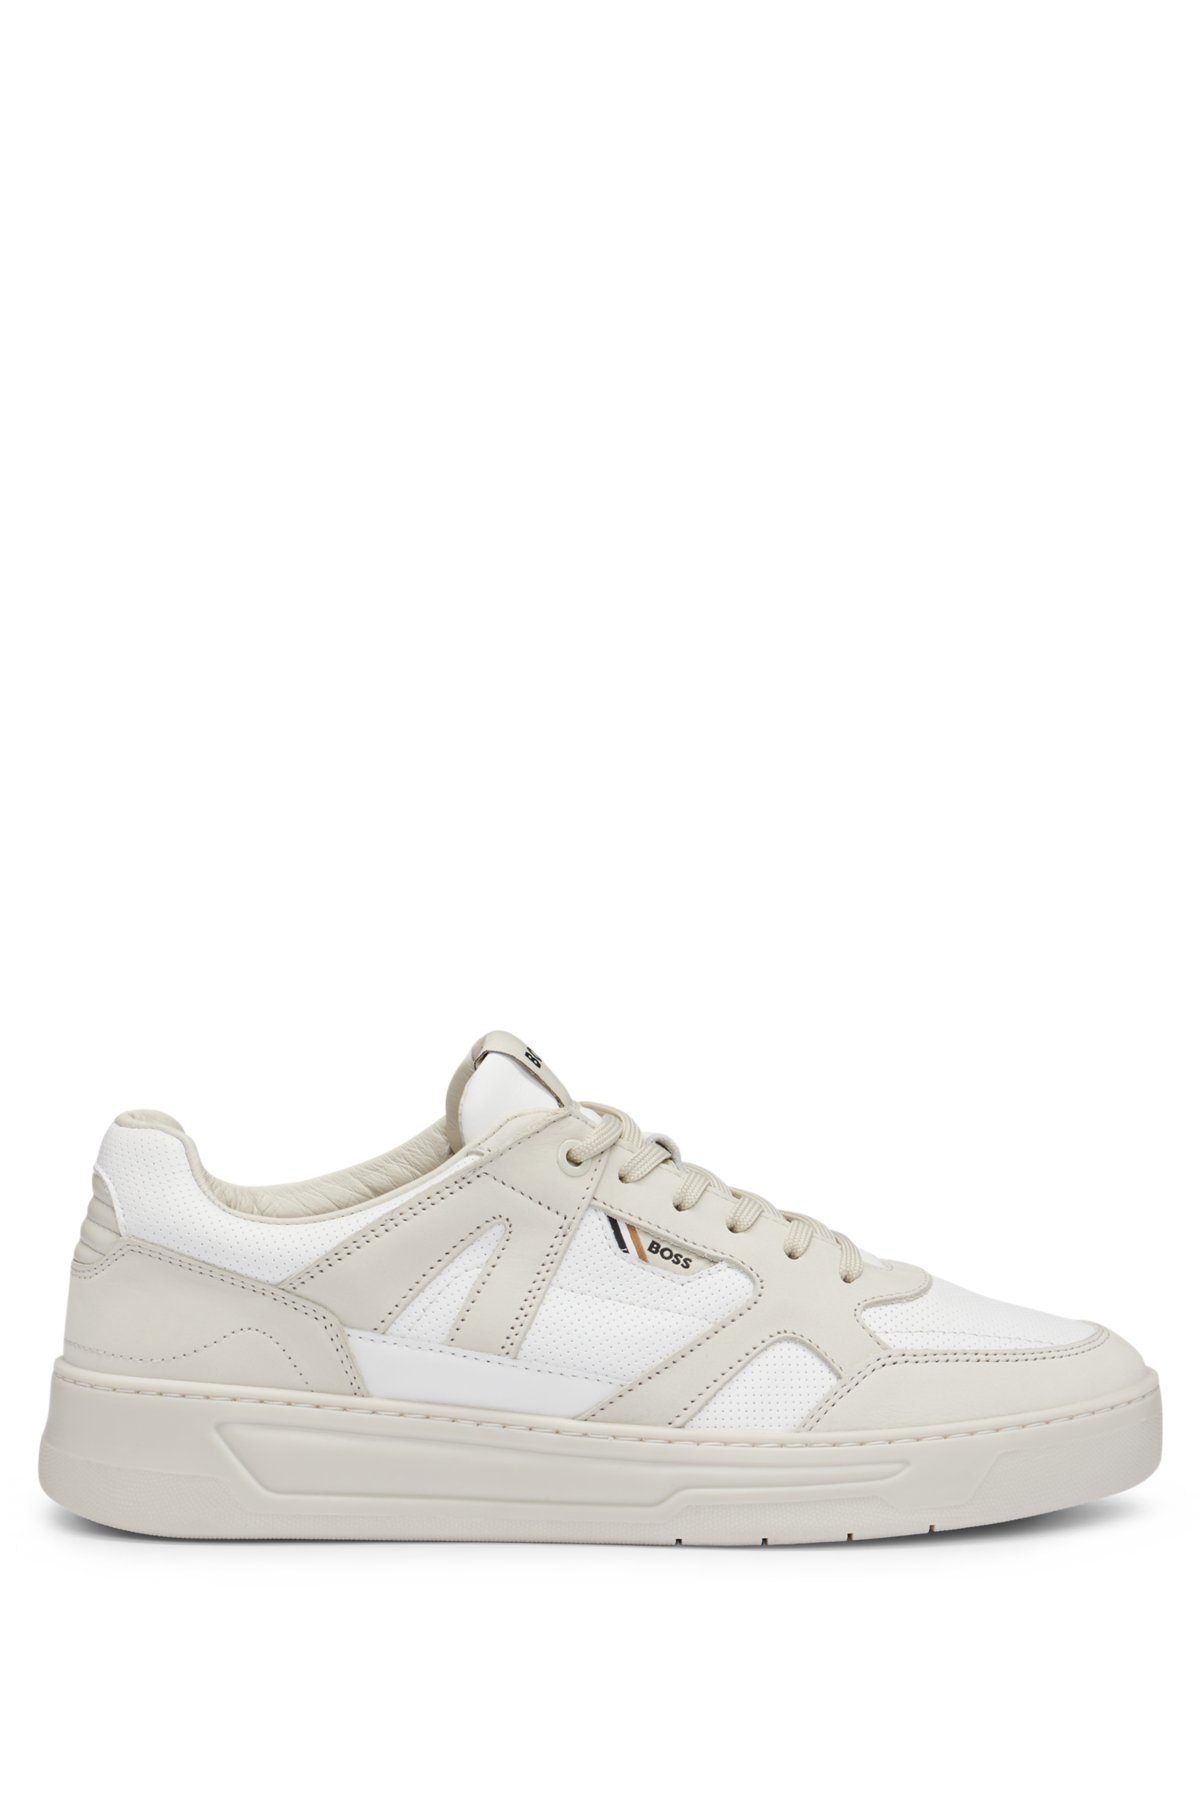 BOSS - Mixed-material trainers with nubuck and leather